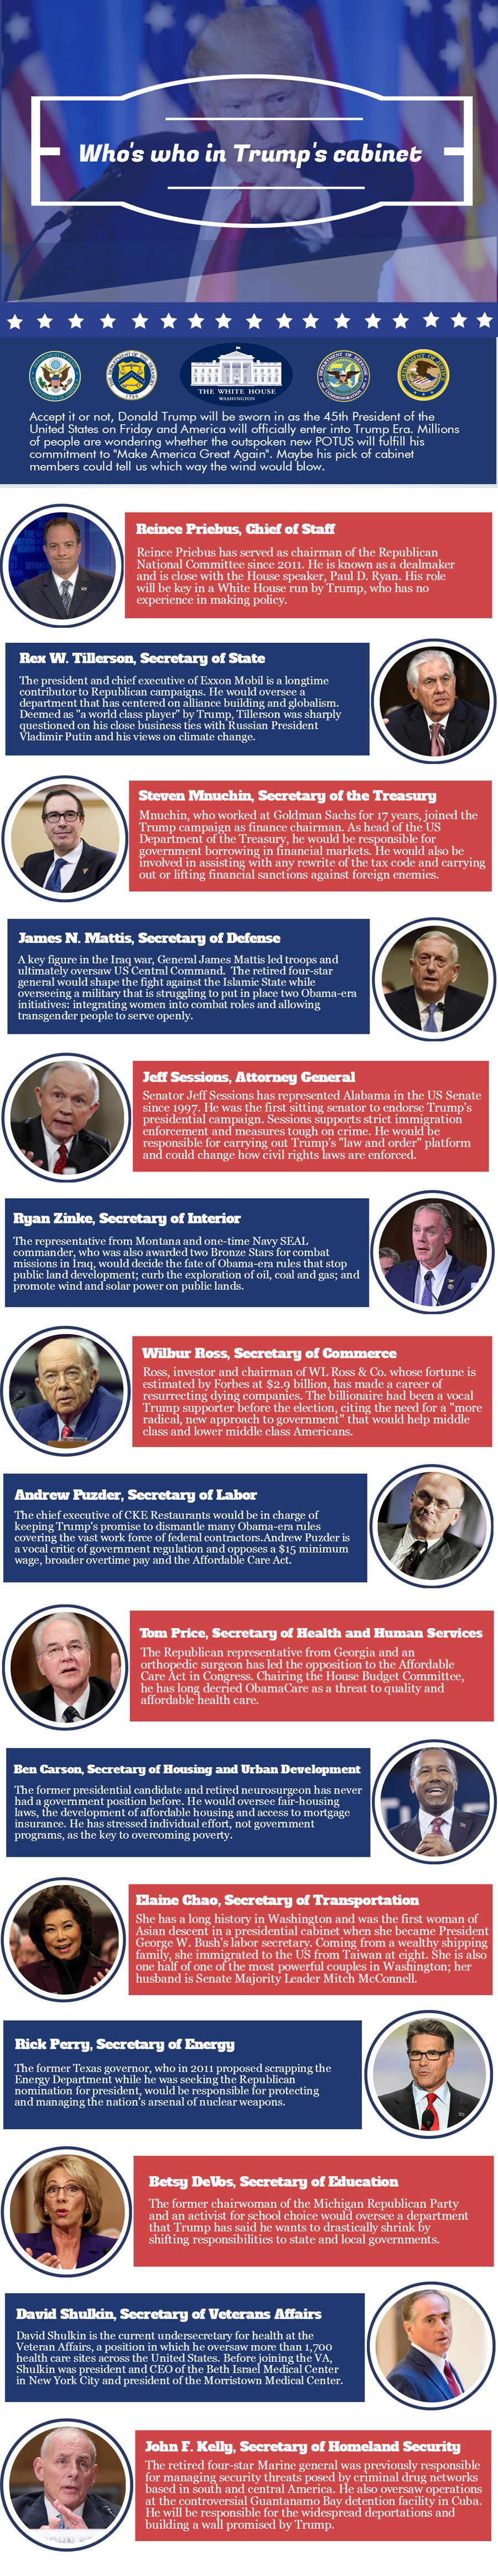 Who's who in Trump's cabinet